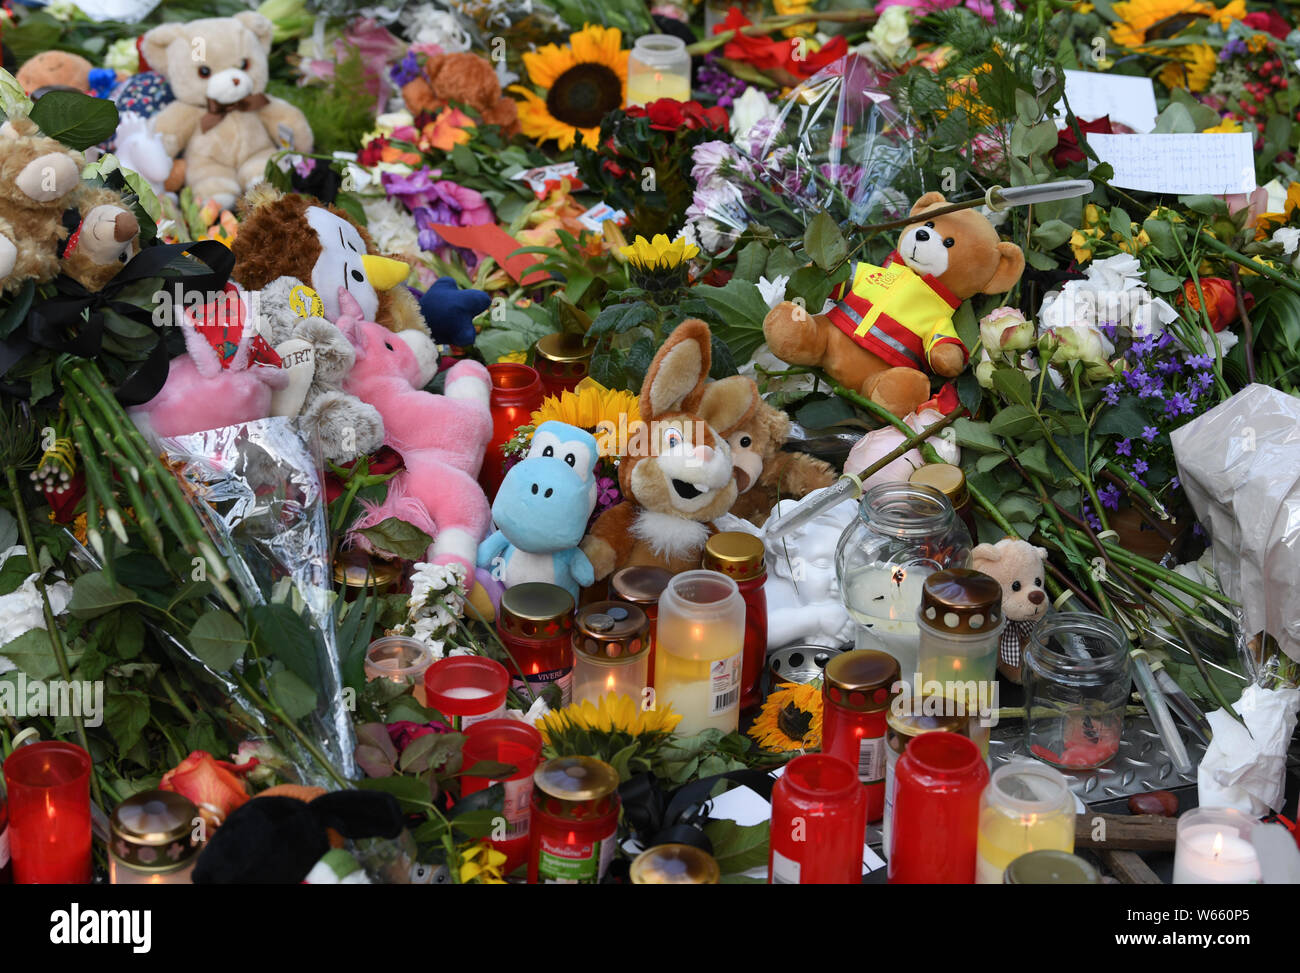 31 July 2019, Hessen, Frankfurt/Main: A sea of flowers, cuddly toys and condolences has formed on track 7 of the main station. An eight-year-old boy was pushed and killed here on 29 July by a man in front of an ICE train. Photo: Arne Dedert/dpa Stock Photo